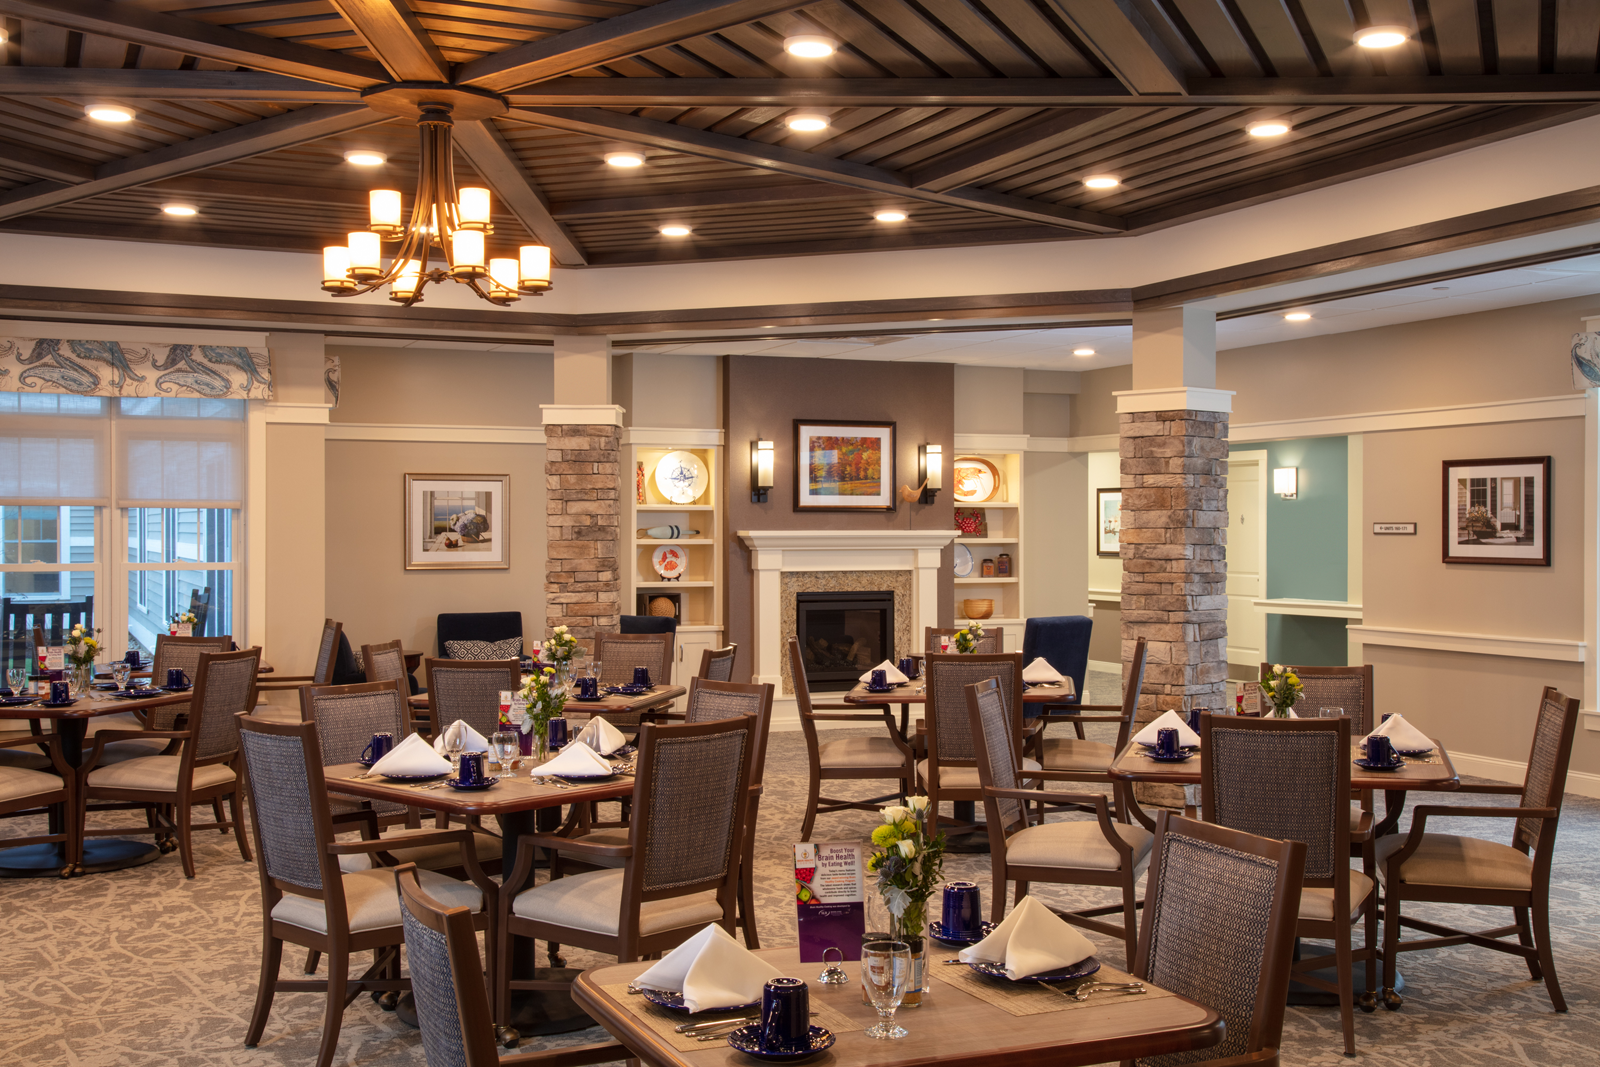 WDC interior designers provided plenty of space for this dining room in an assisted living community